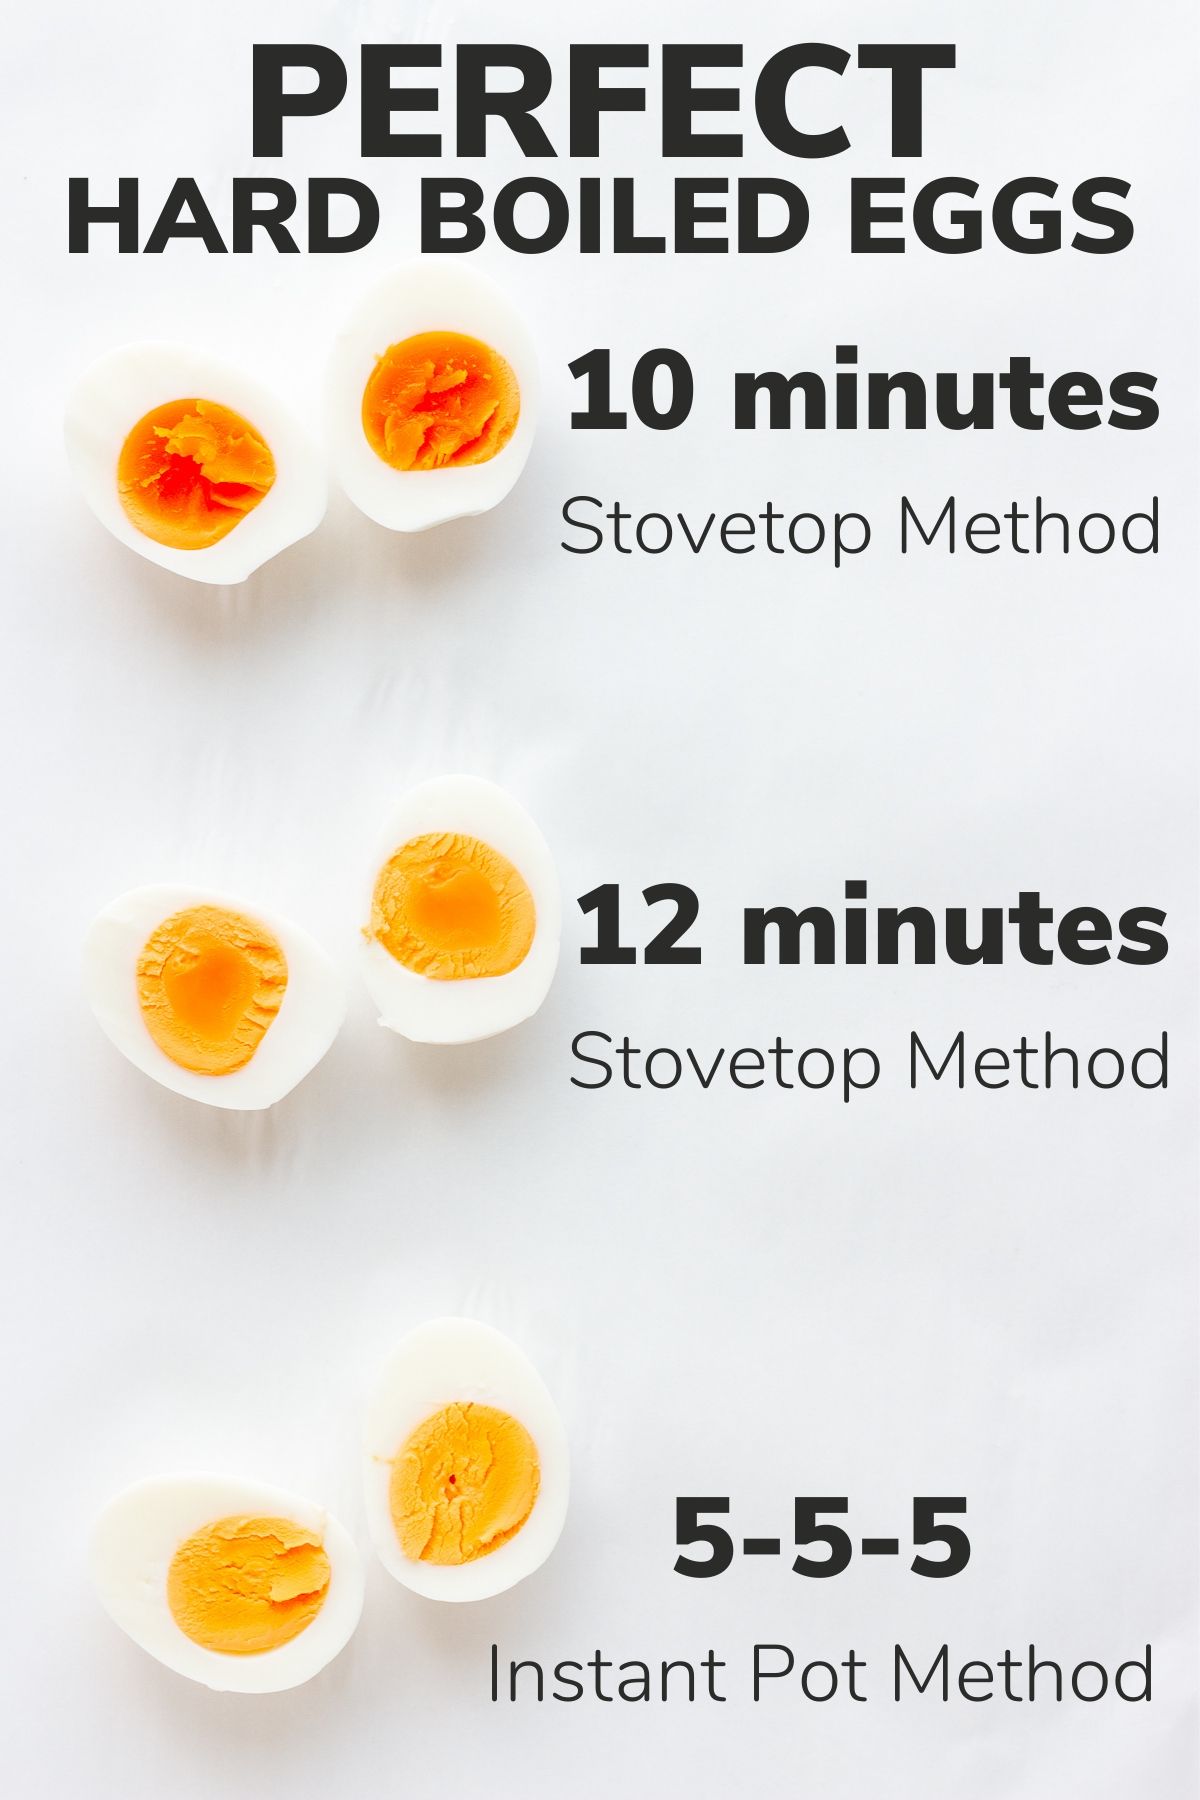 Infographic showing hard boiled eggs at 10 and 12 minutes using the stovetop method and the 5-5-5 Instant Pot method.